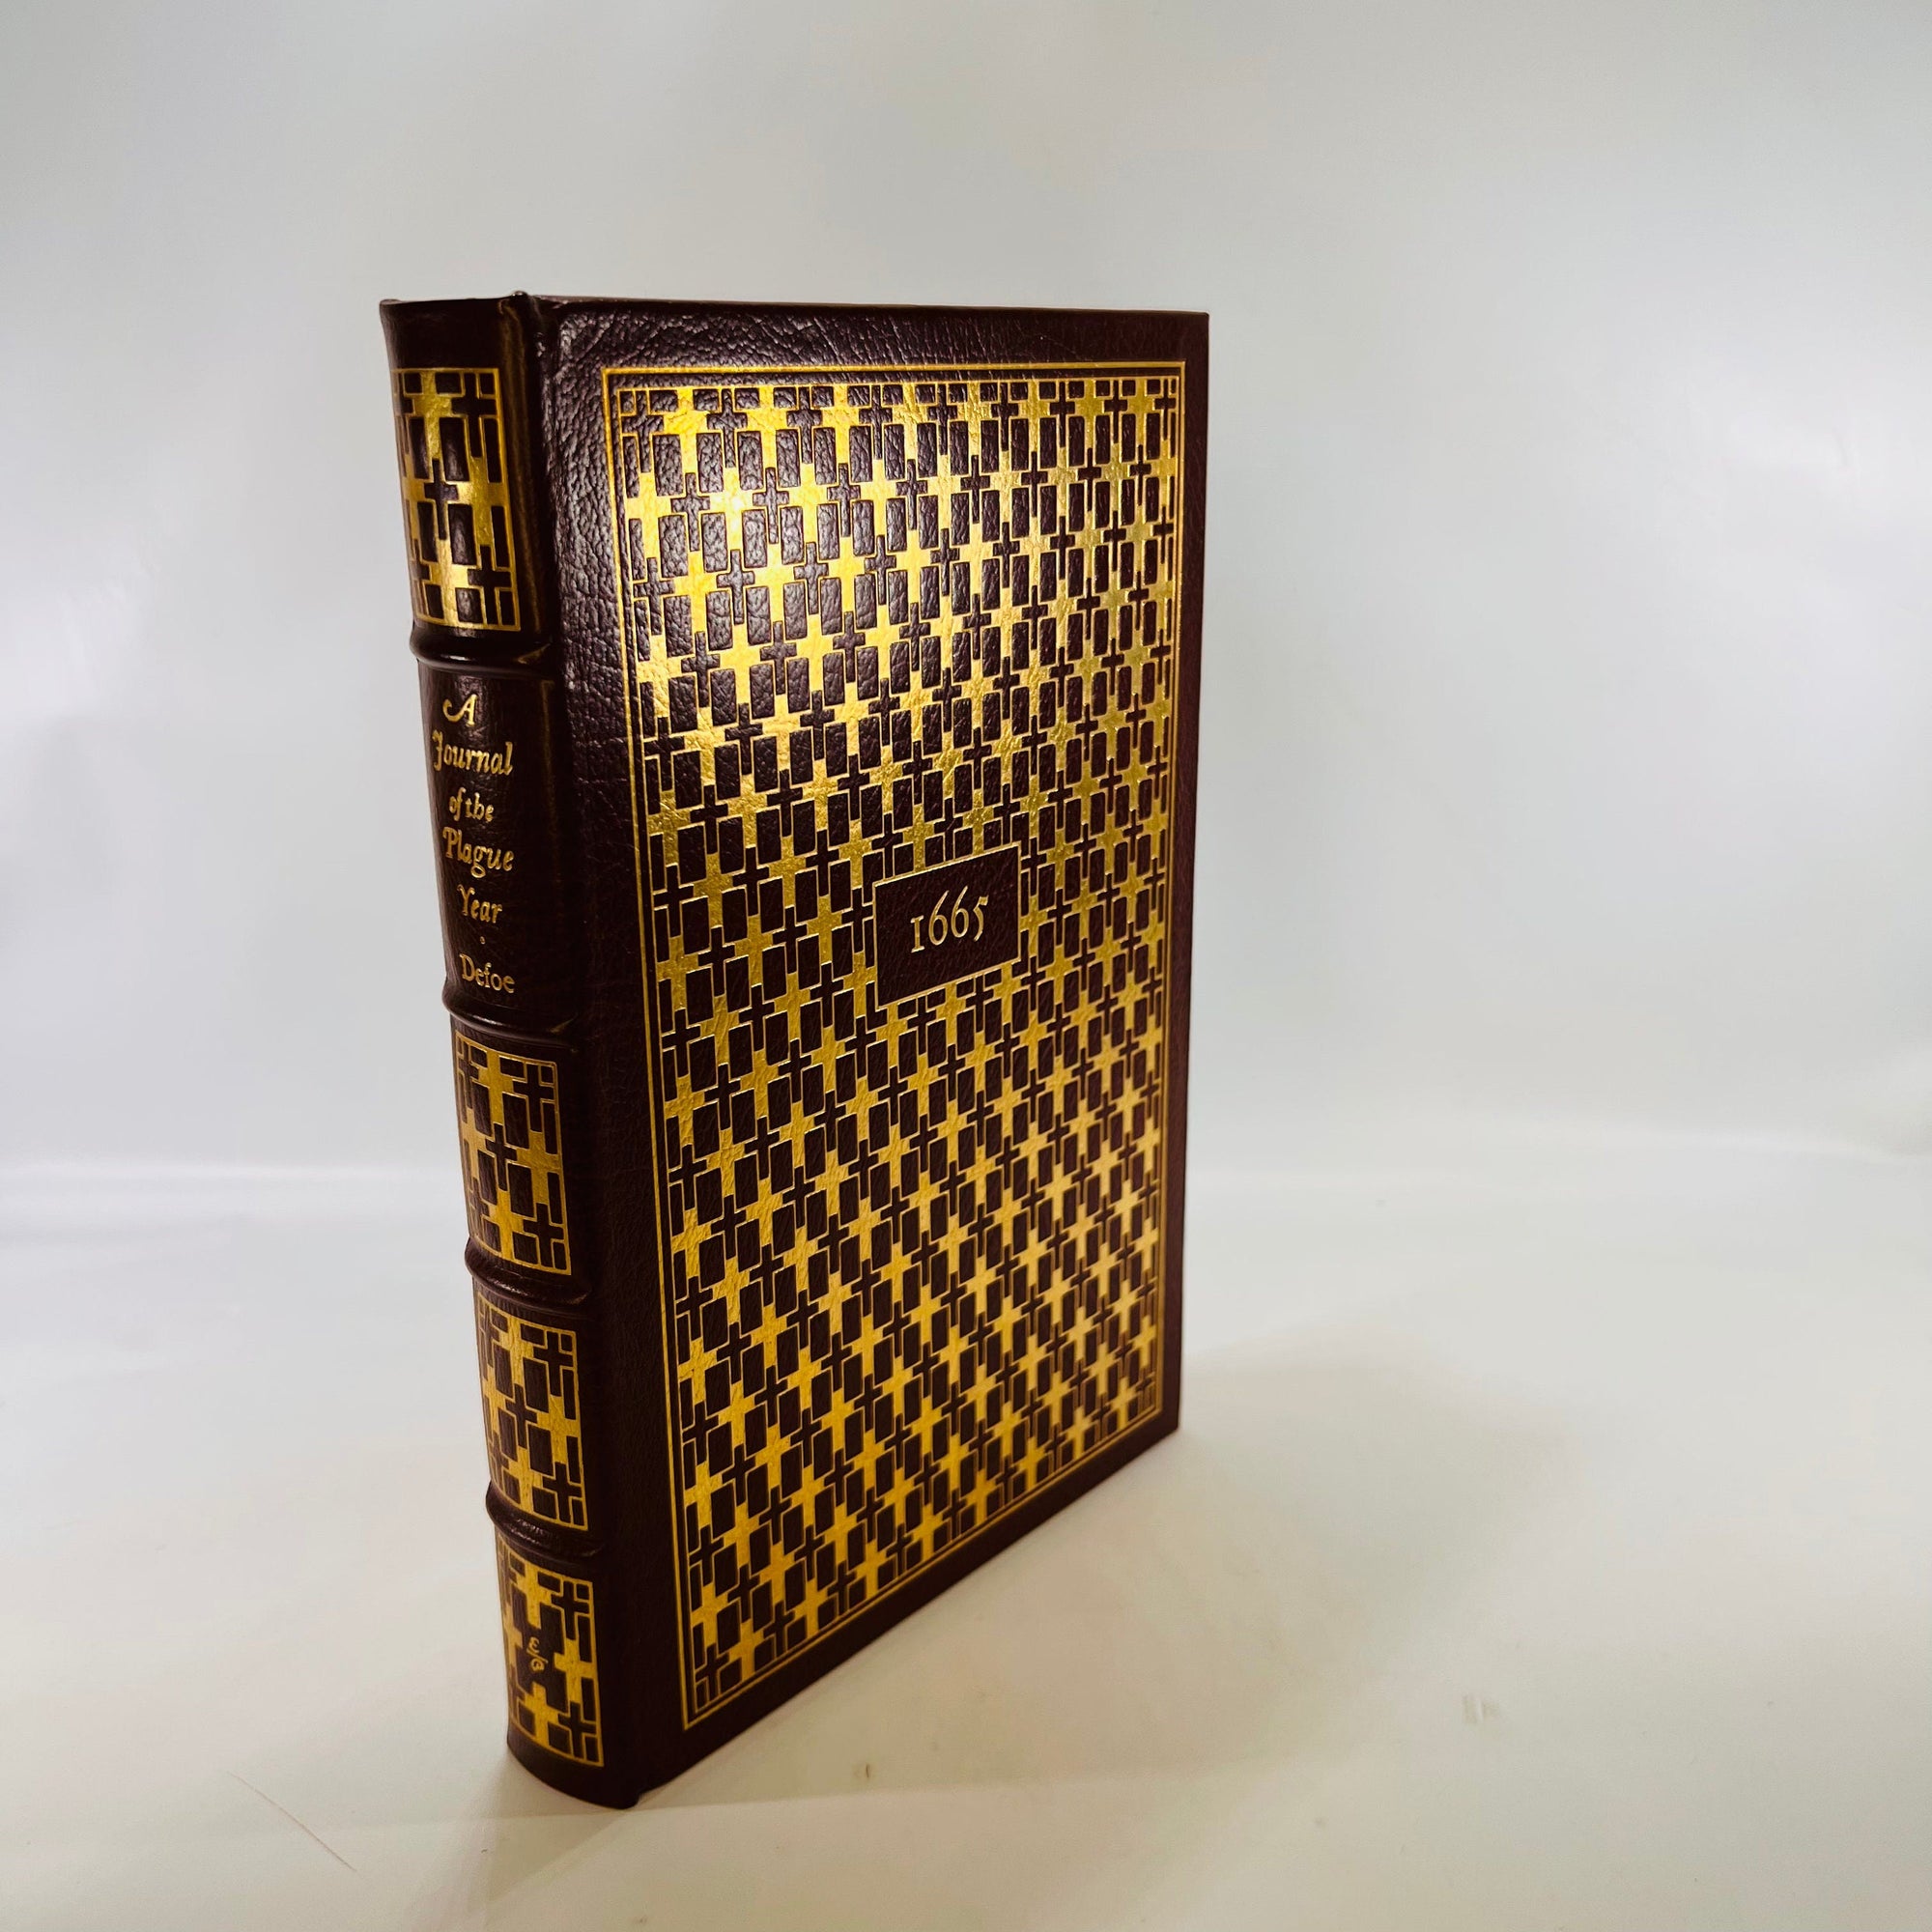 A Journal of the Plague Year 1665 by Danial Defoe 1978 Easton Press part of the 100 Greatest Books